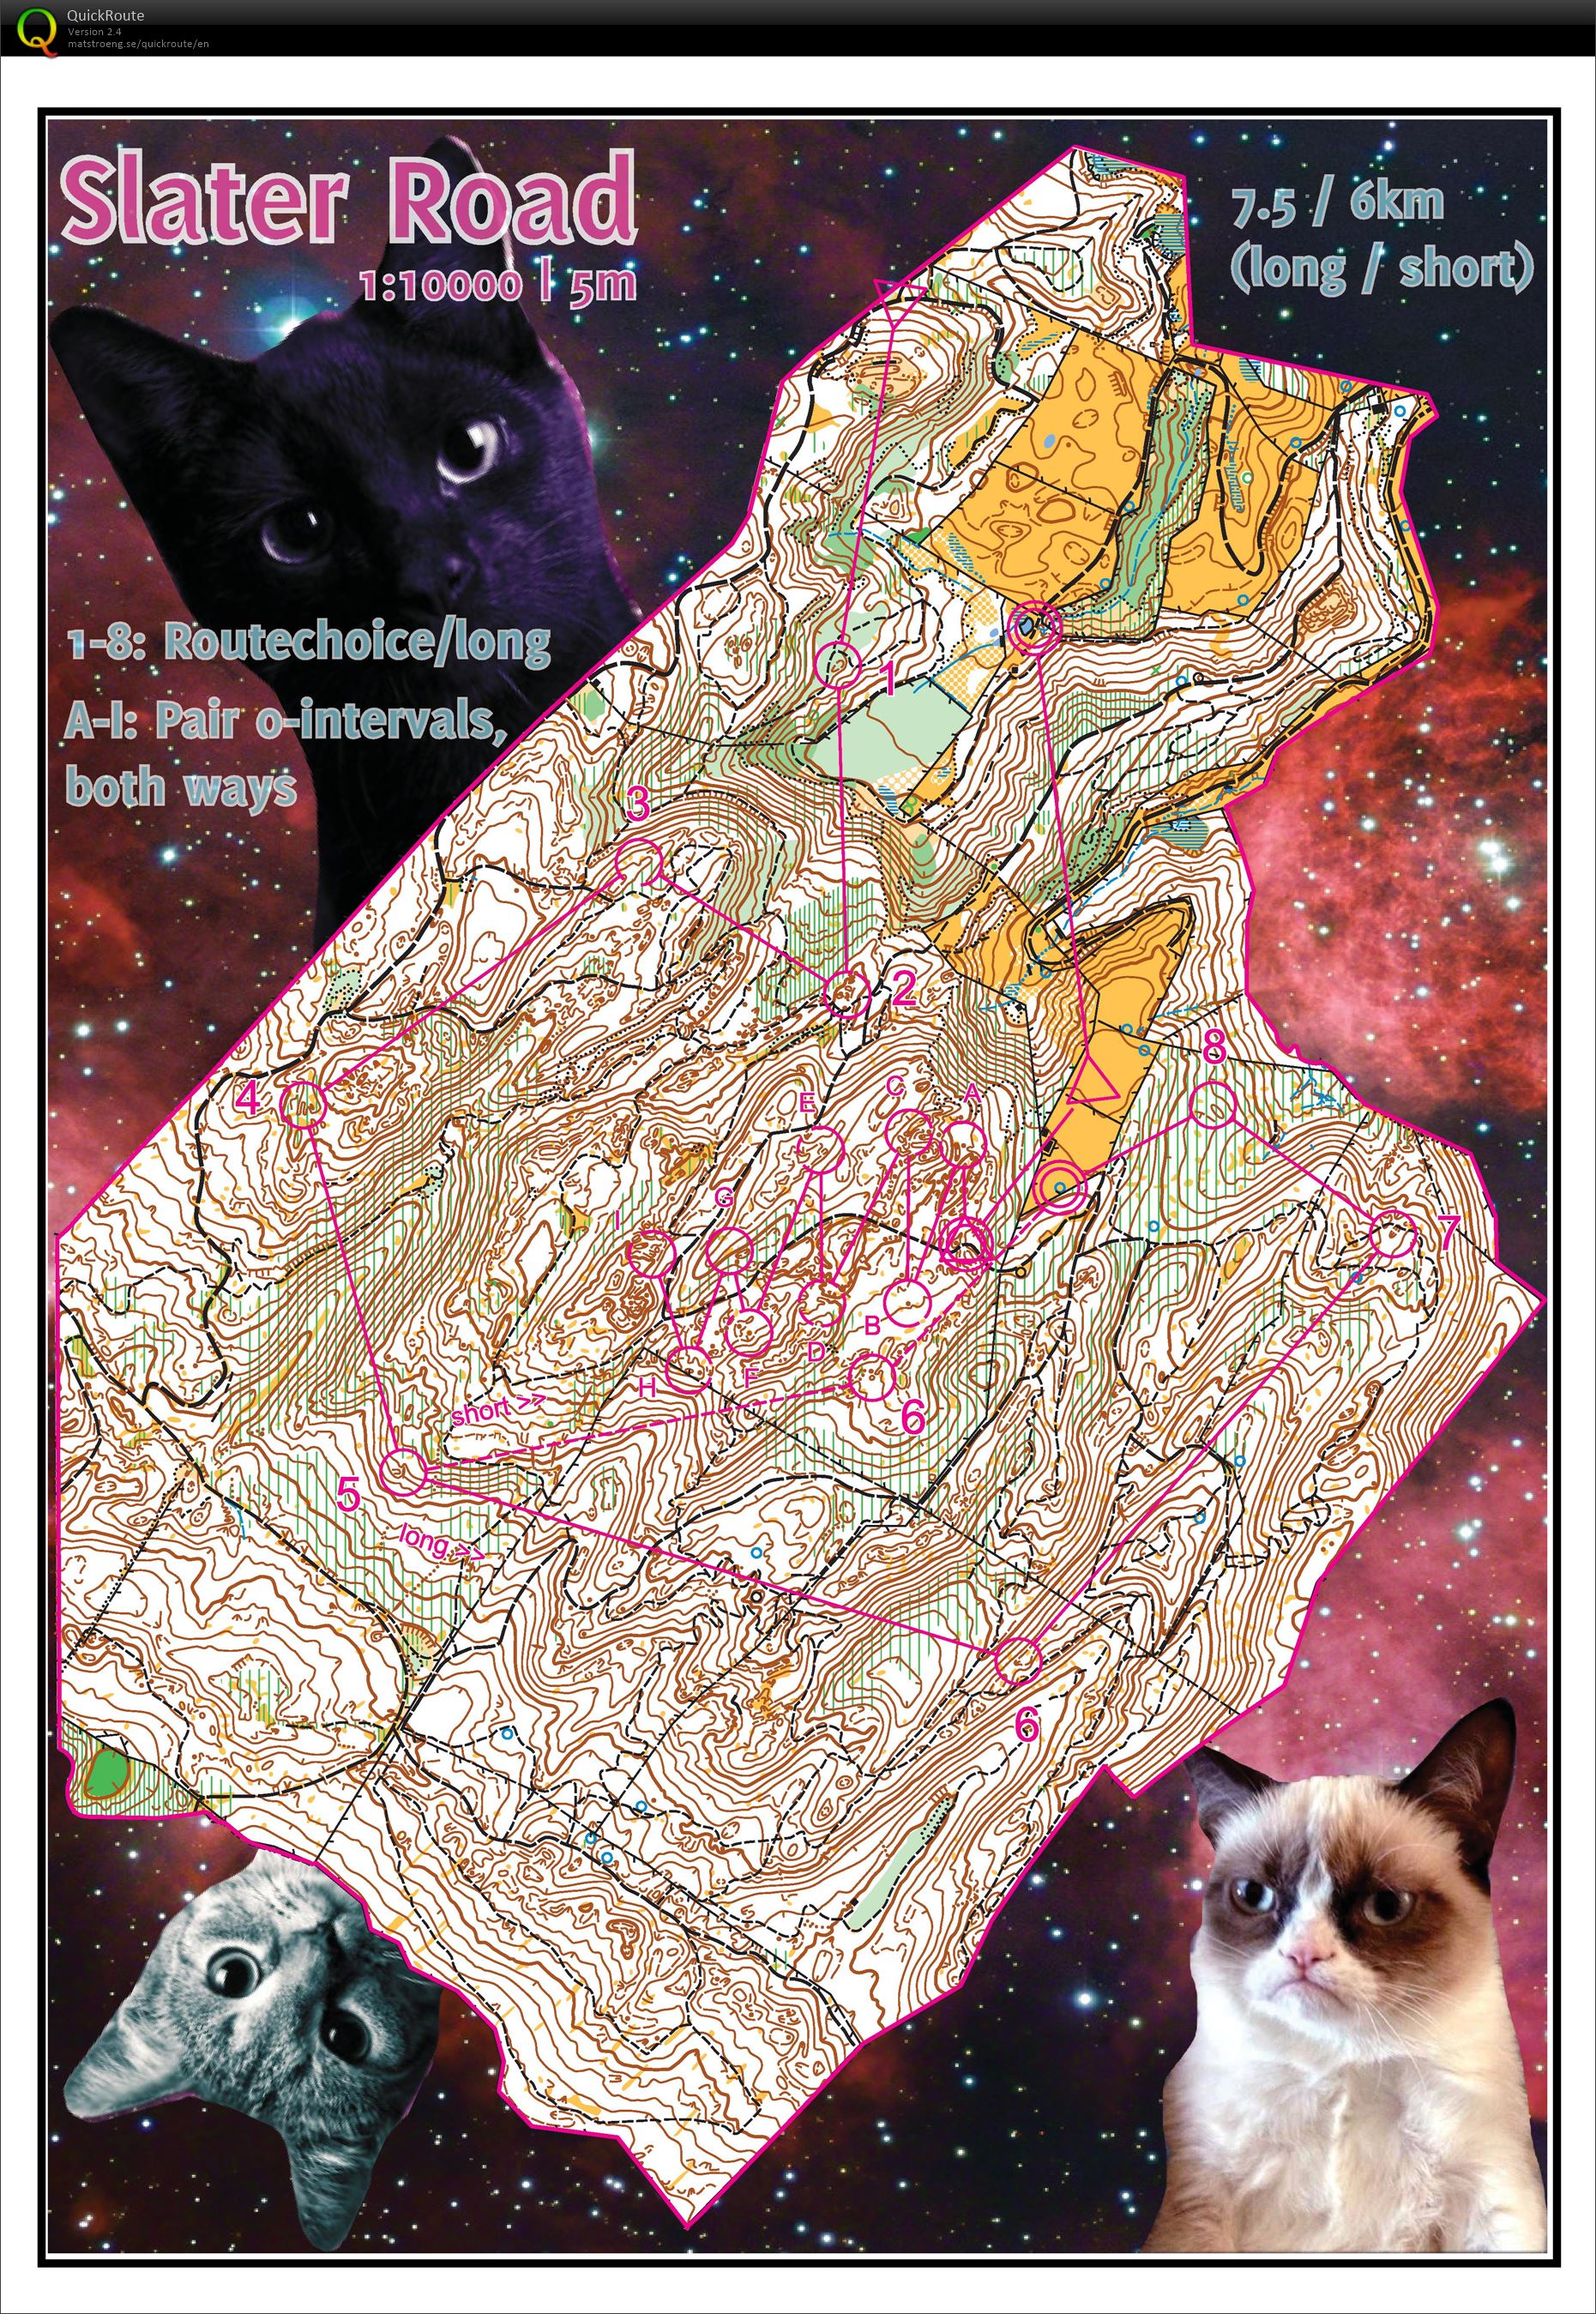 Space Cats - Part 1 (26.04.2014)